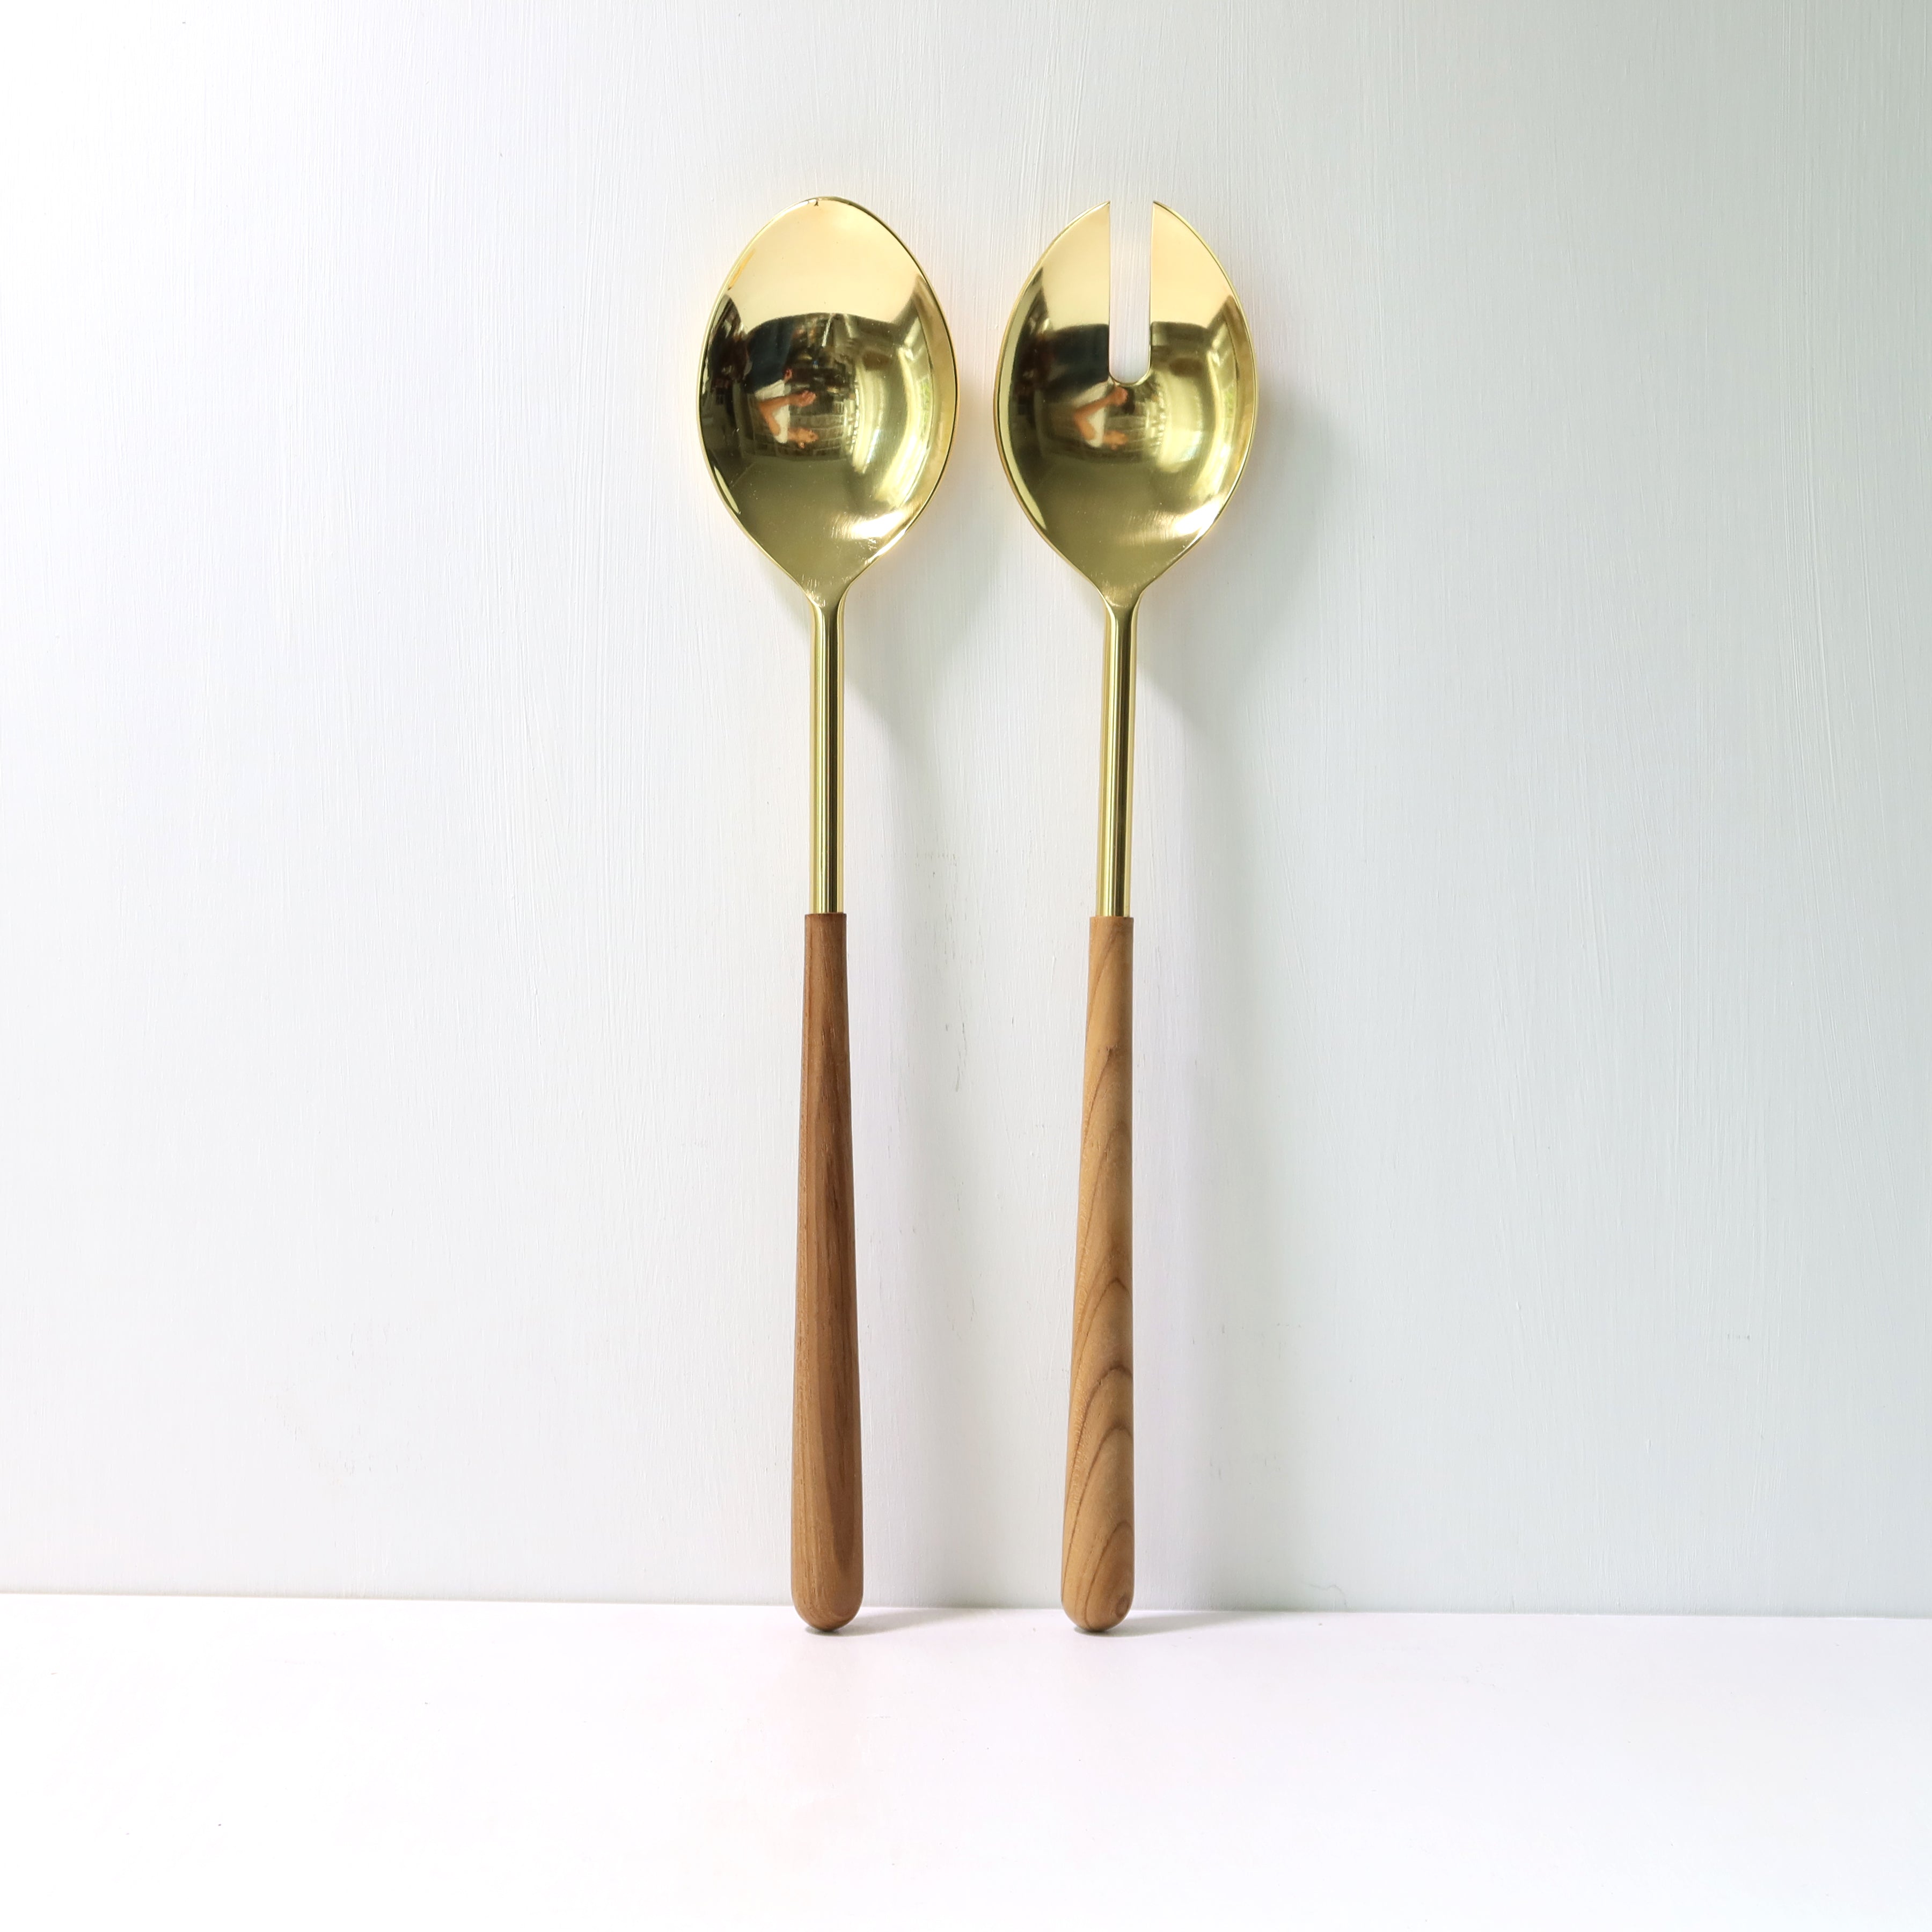 Serving Set in Gold and Wood